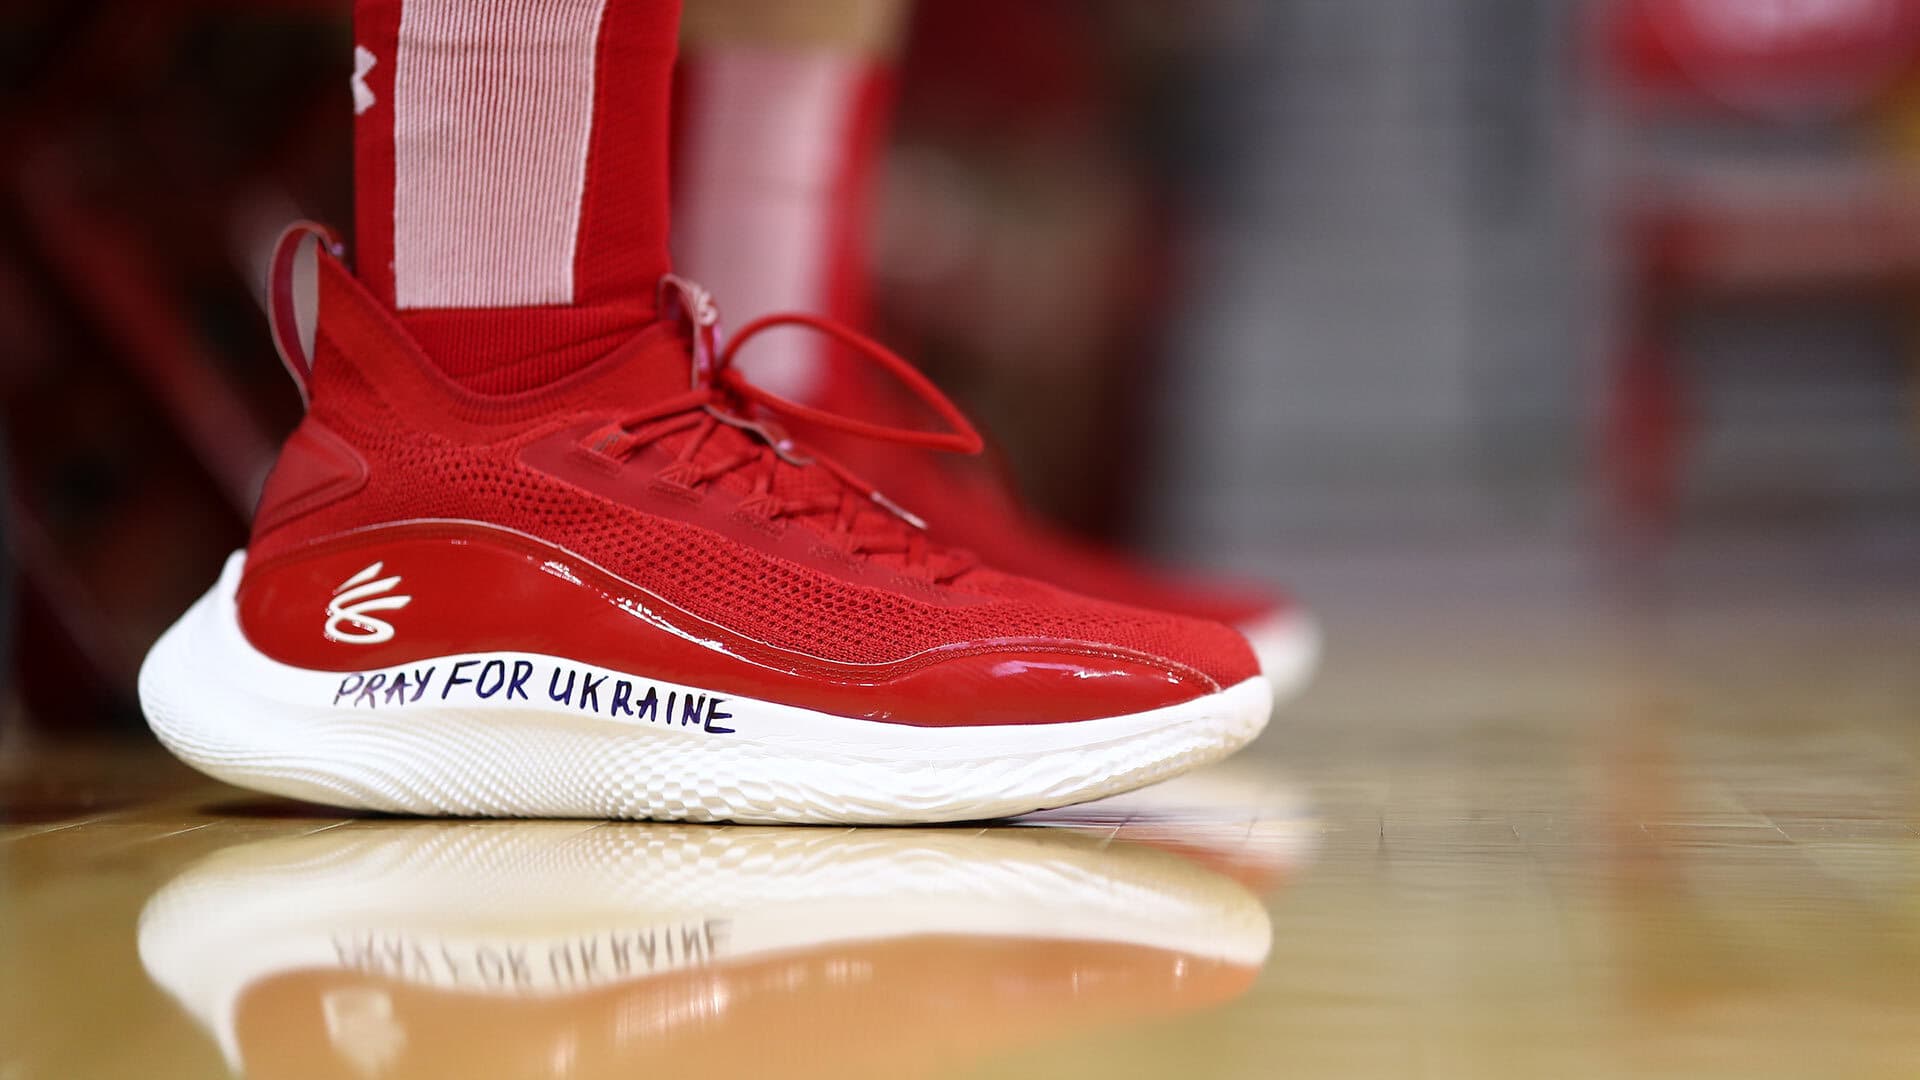 Red and white basketball shoe with "PRAY FOR UKRAINE" written on it in marker